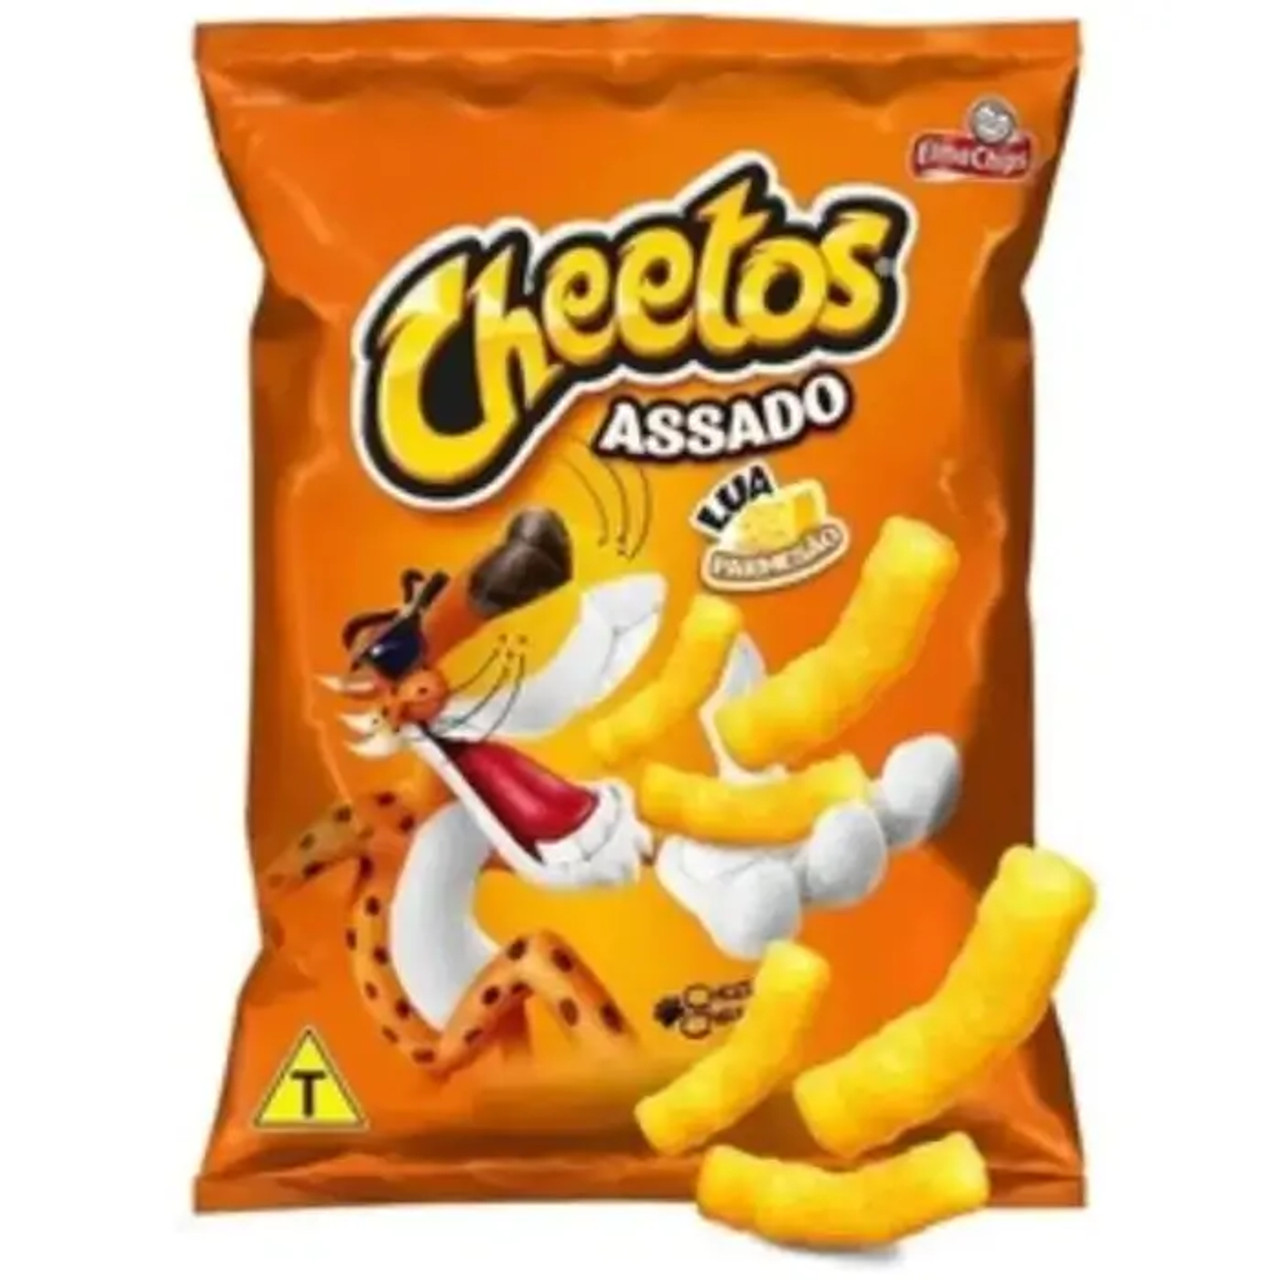 Elma Chips Cheetos Parmesan Cheese (12/Case) 125g - Savory Cheese Snack Delight - Chicken Pieces